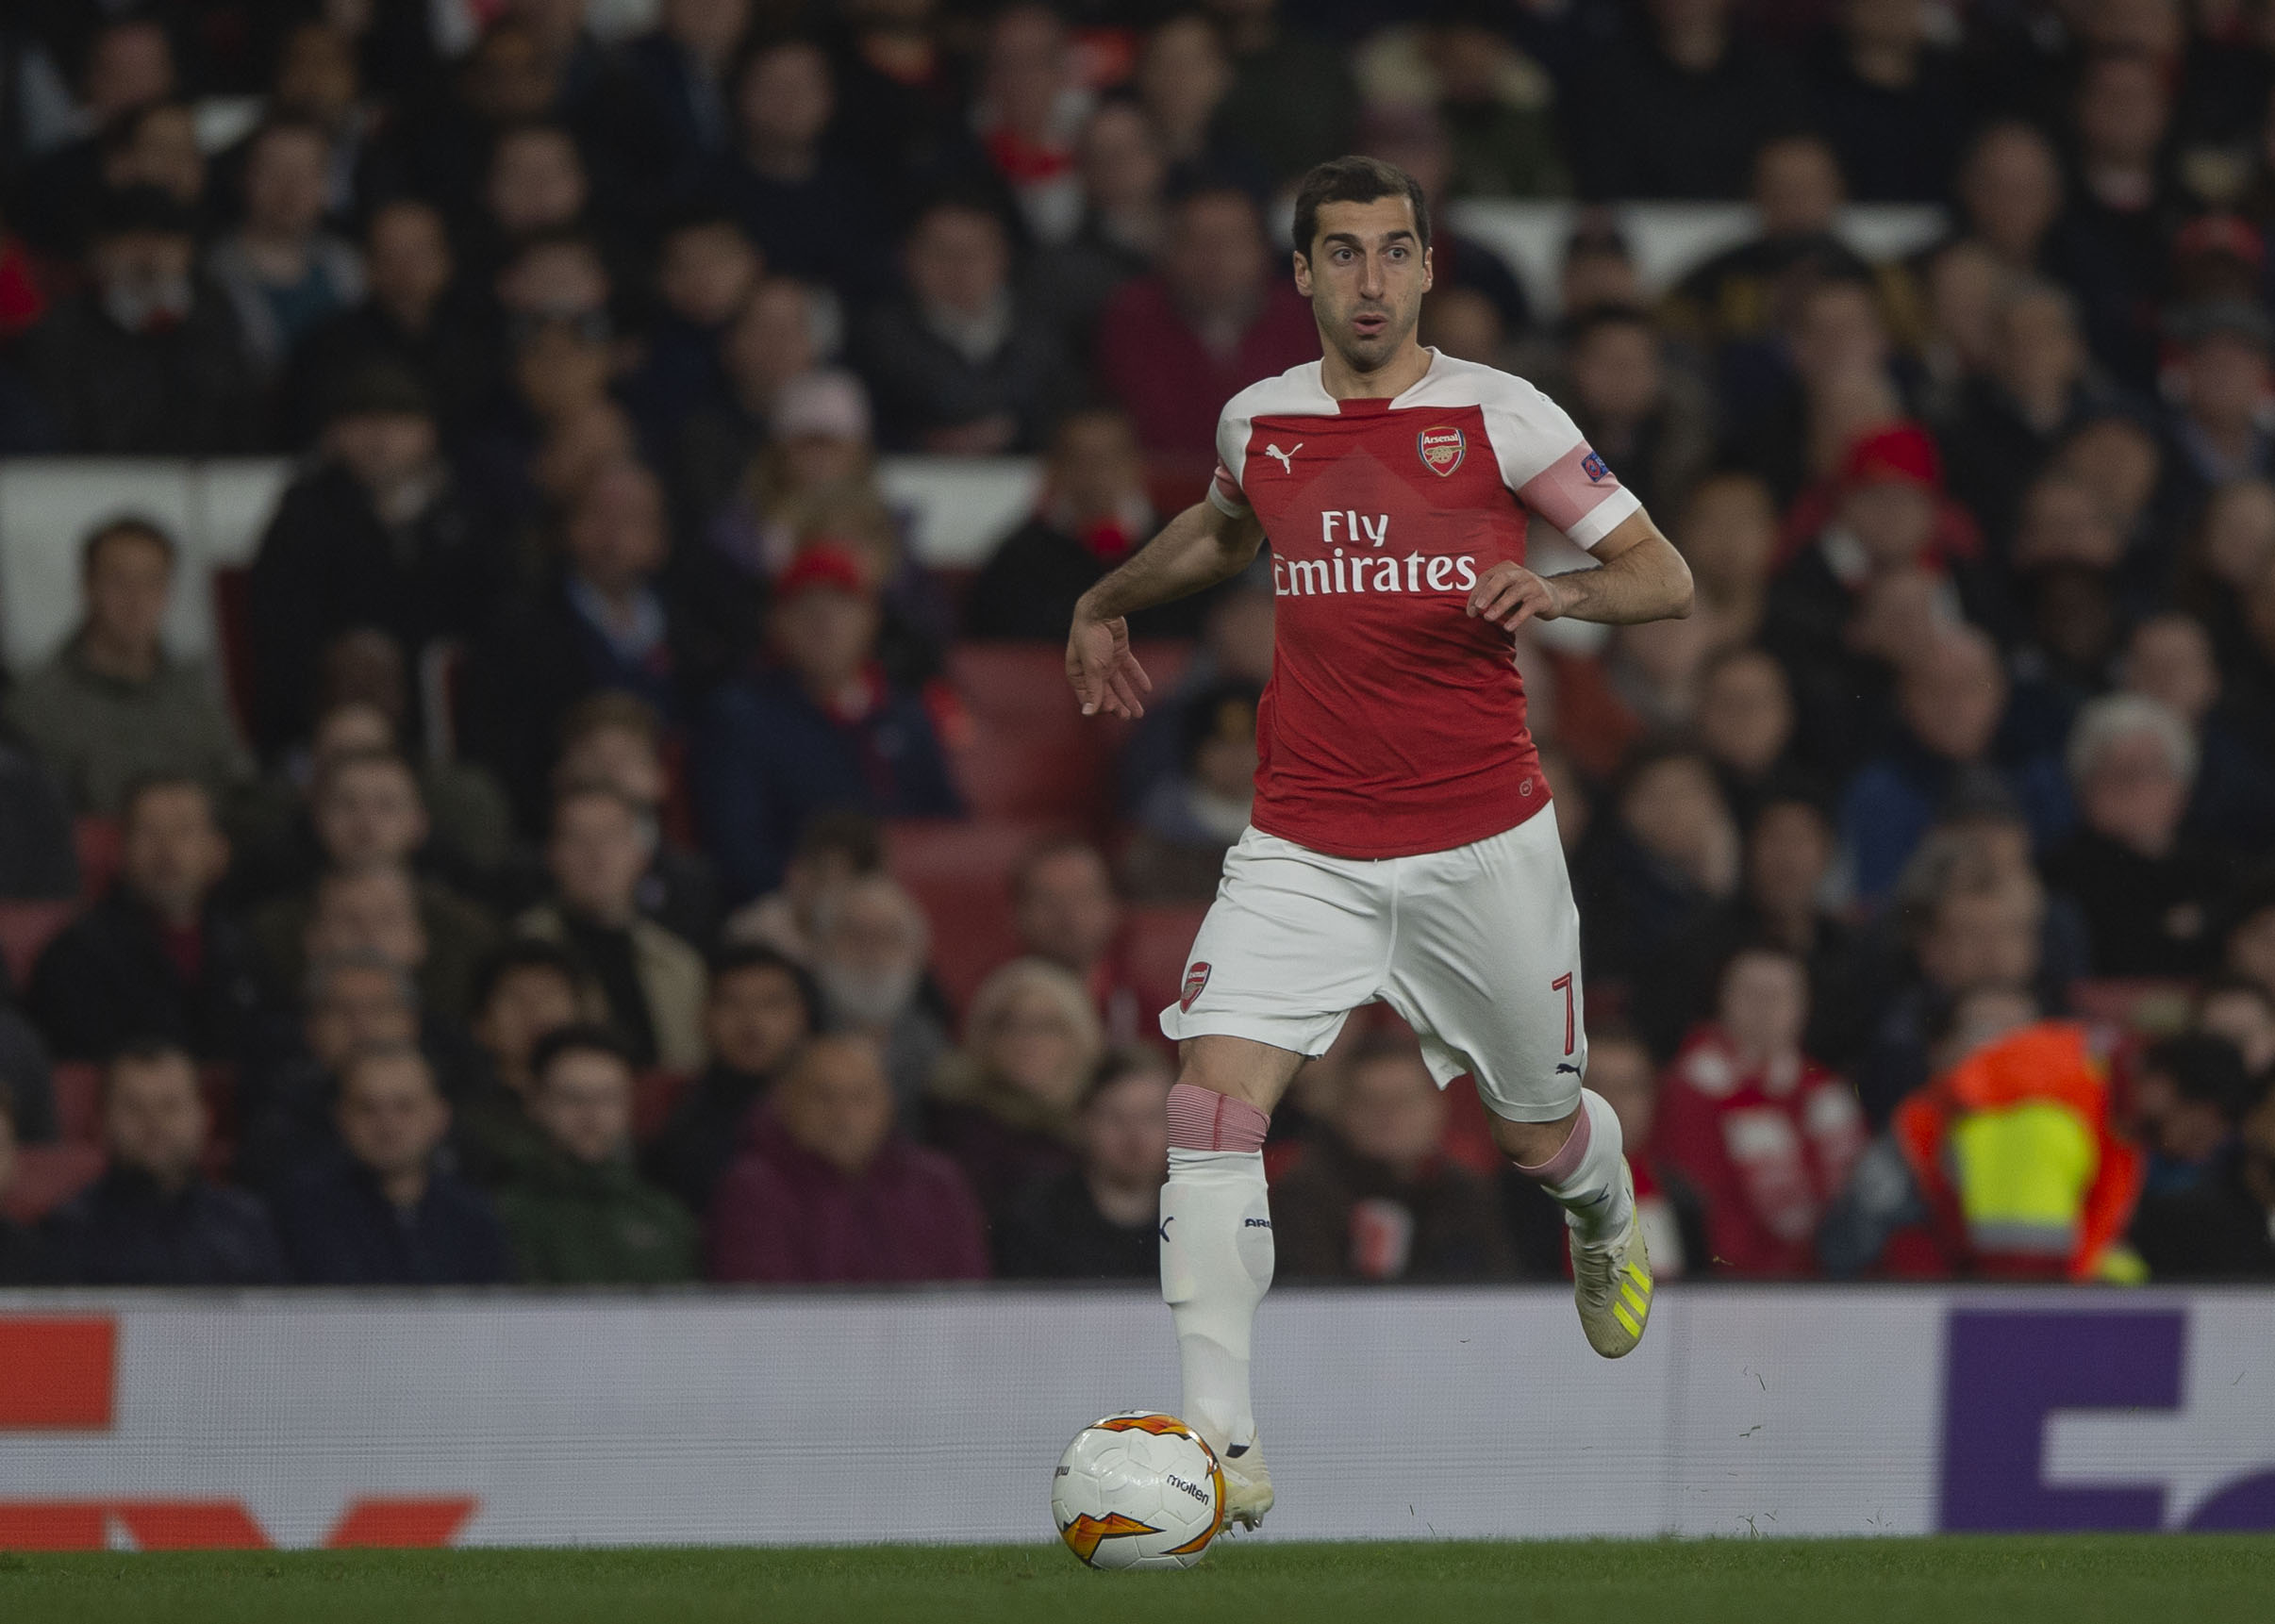 Europa League Final | Why Henrikh Mkhitaryan’s absence would hardly be a bother for Arsenal against Chelsea